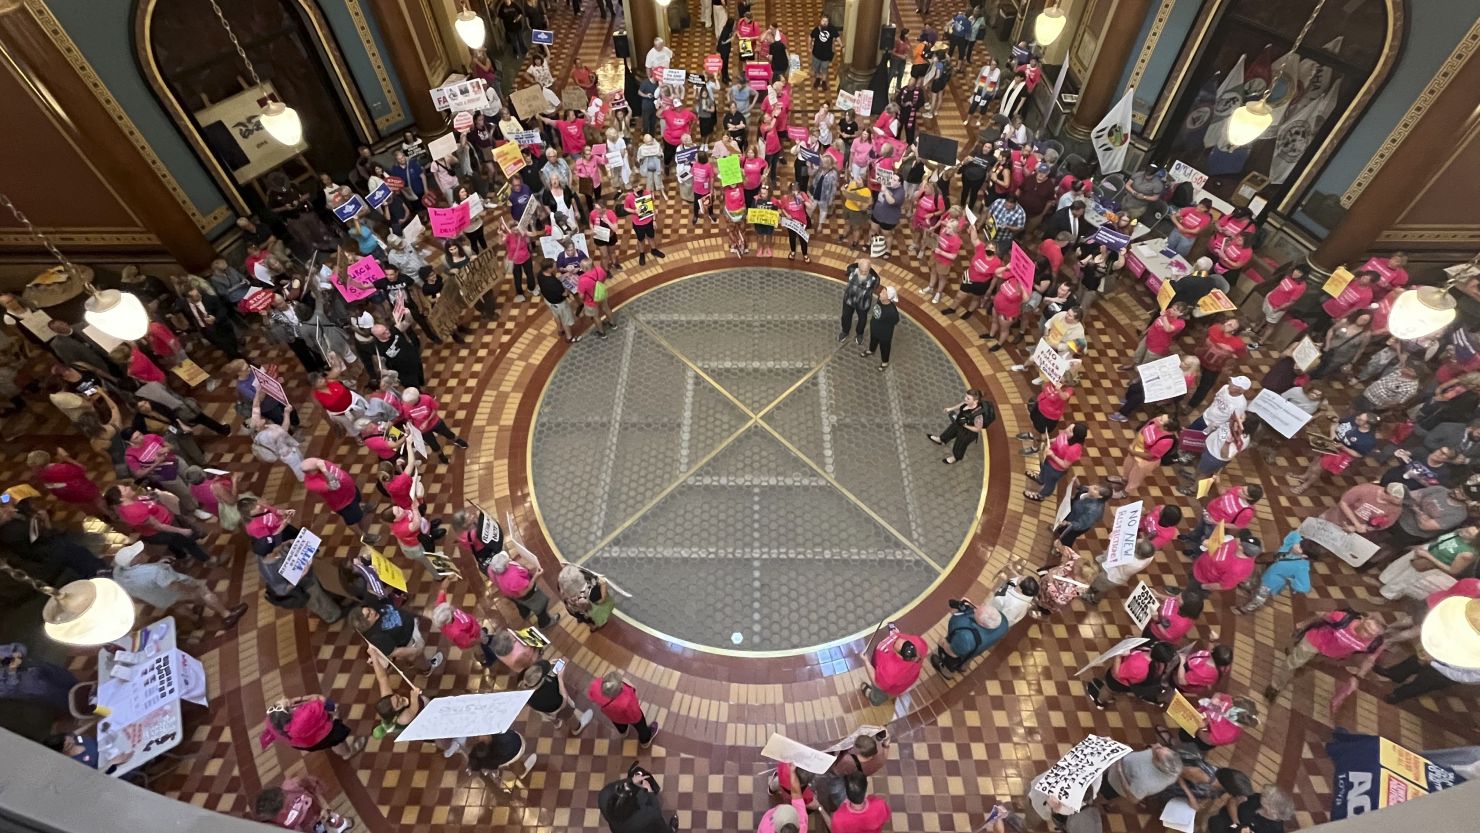 Protesters gather at the Iowa Capitol rotunda to voice opposition to the new ban on abortion after roughly six weeks of pregnancy introduced by Republican lawmakers in a special session in Des Moines, Iowa on Tuesday, July 11, 2023.